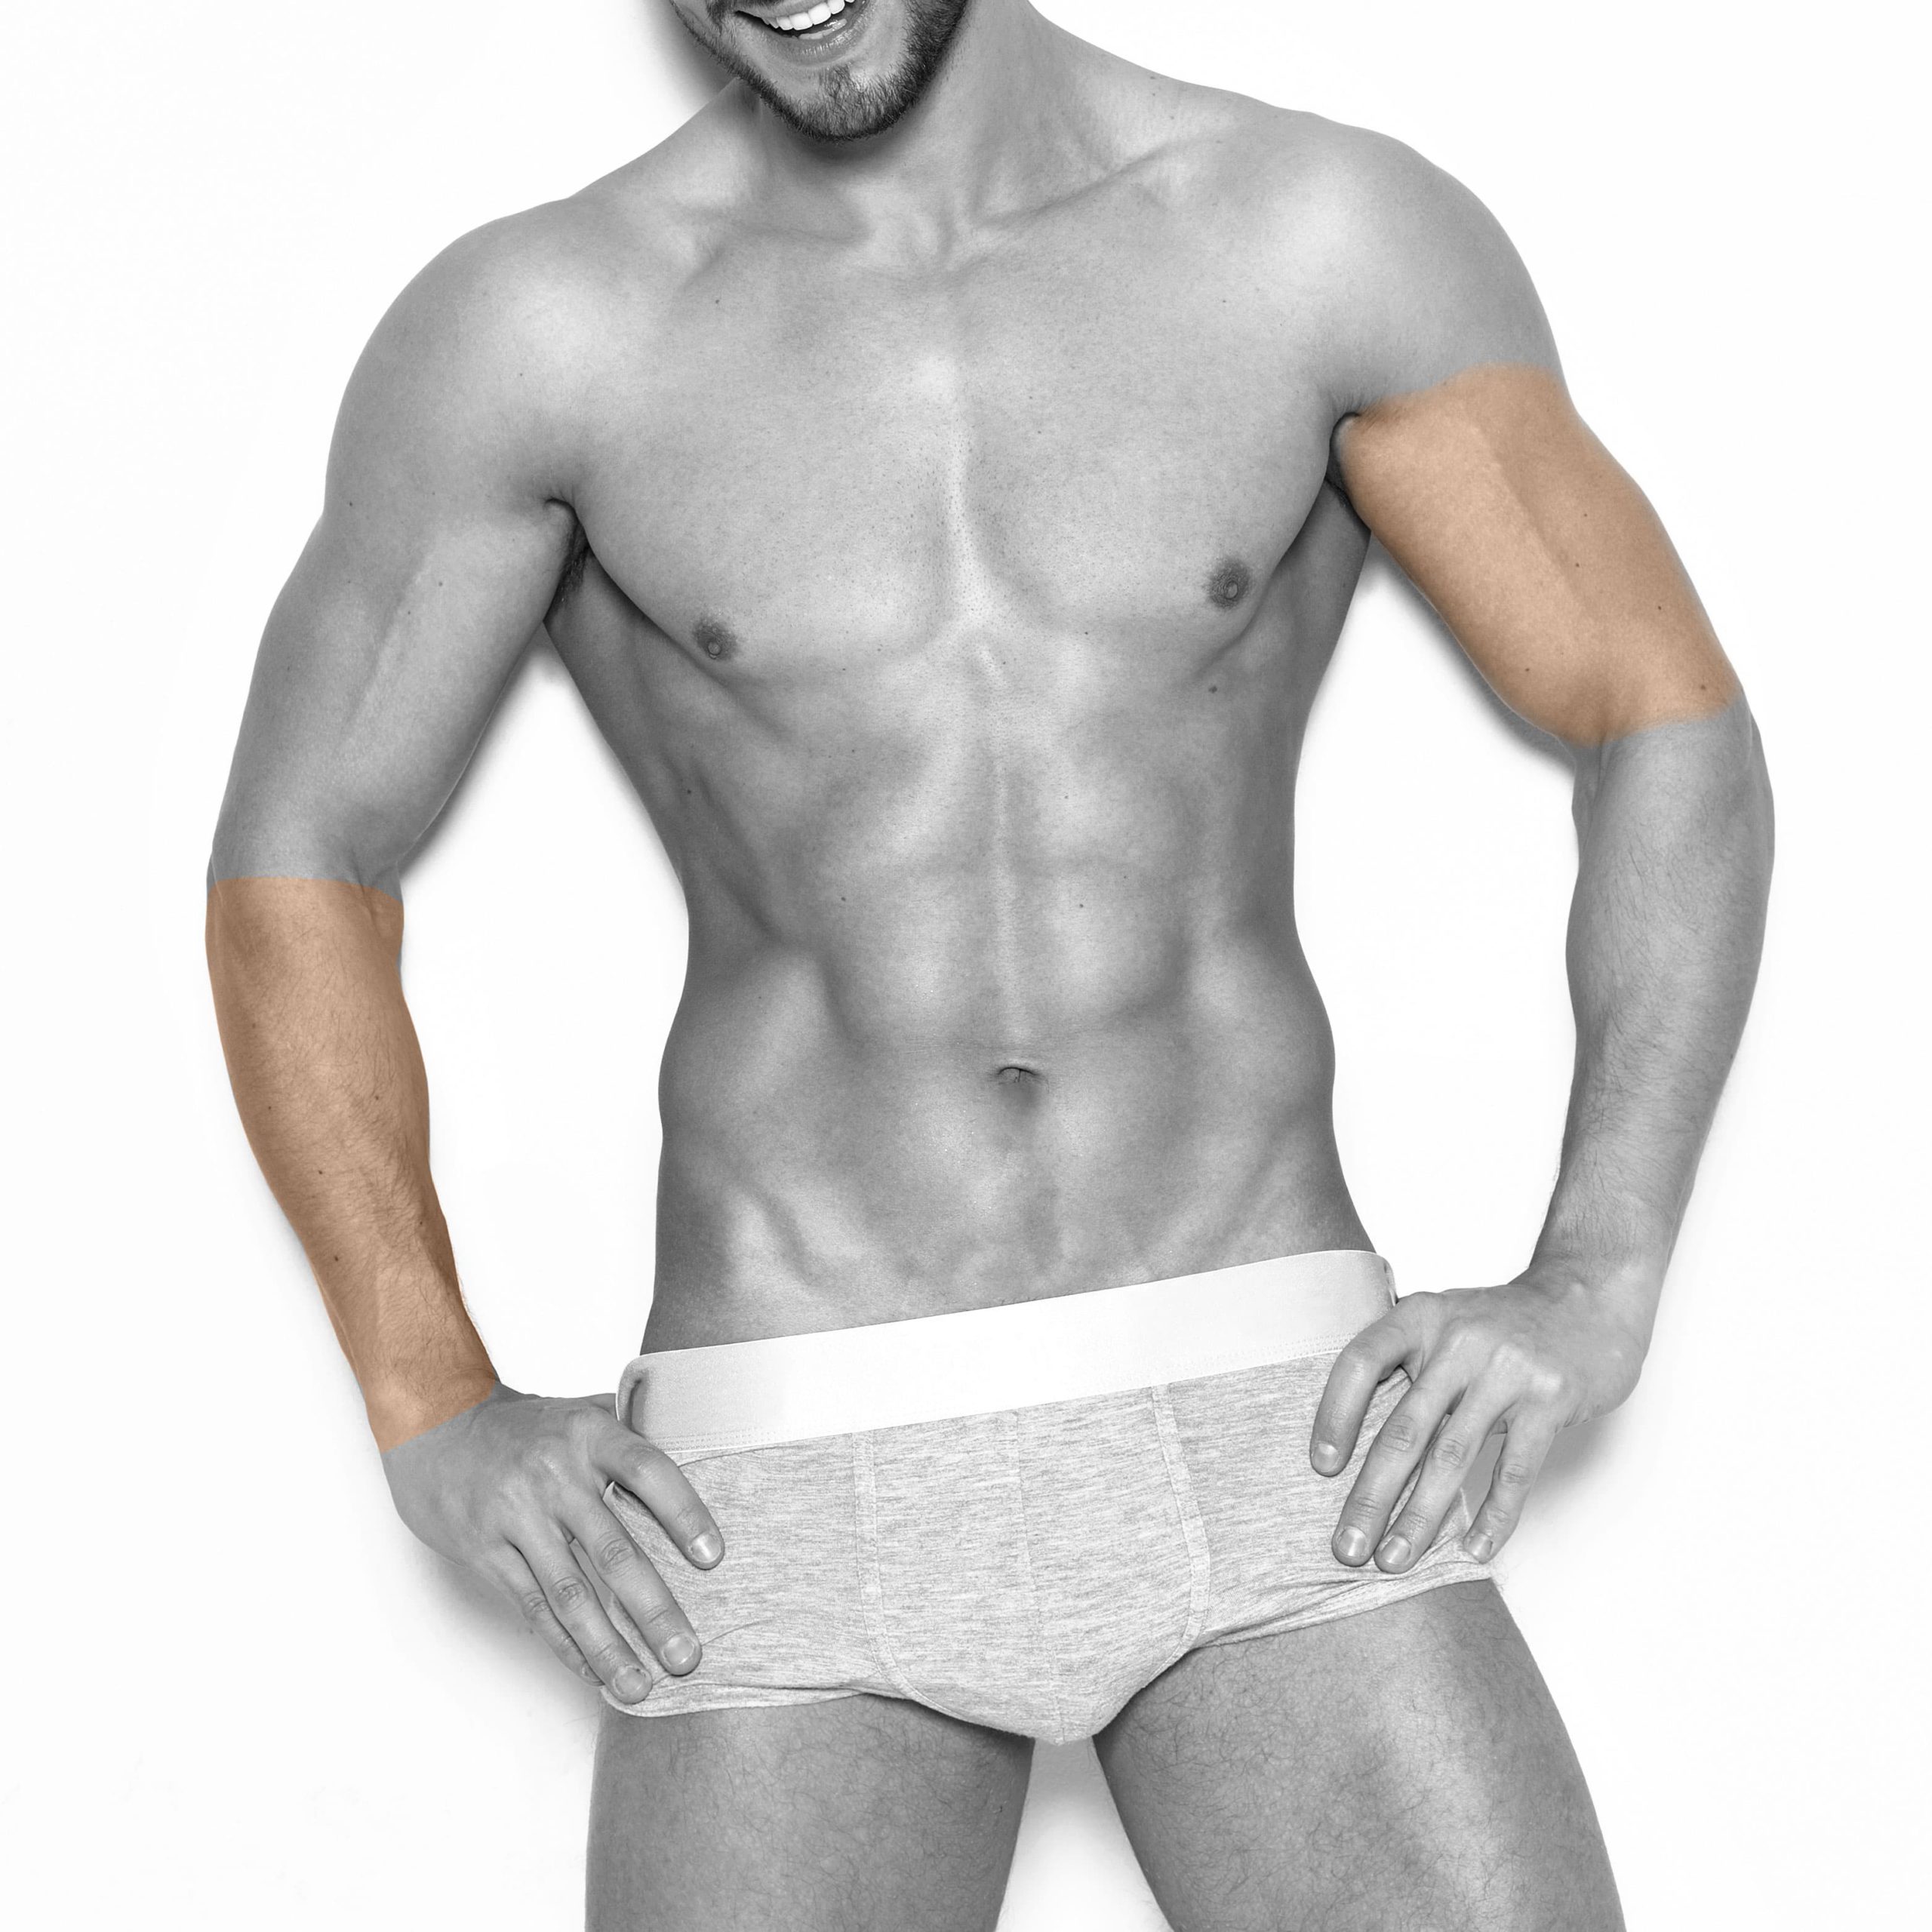 Men's Half Arms Laser Hair Removal in NYC